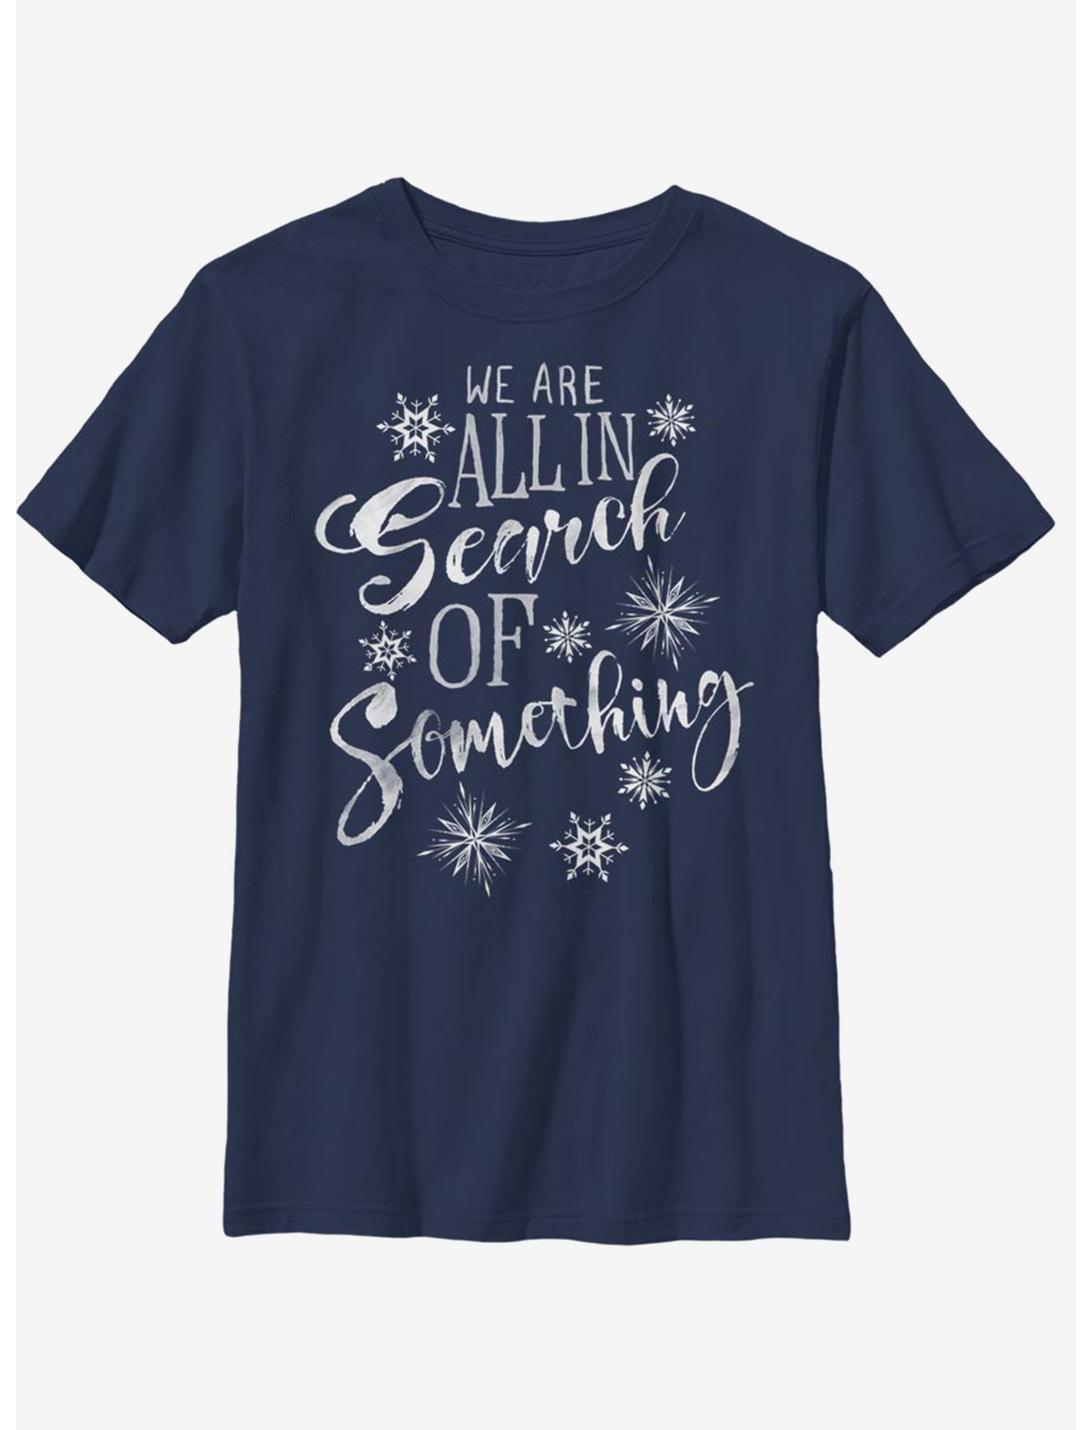 Disney Frozen 2 In Search Of Something Youth T-Shirt, NAVY, hi-res